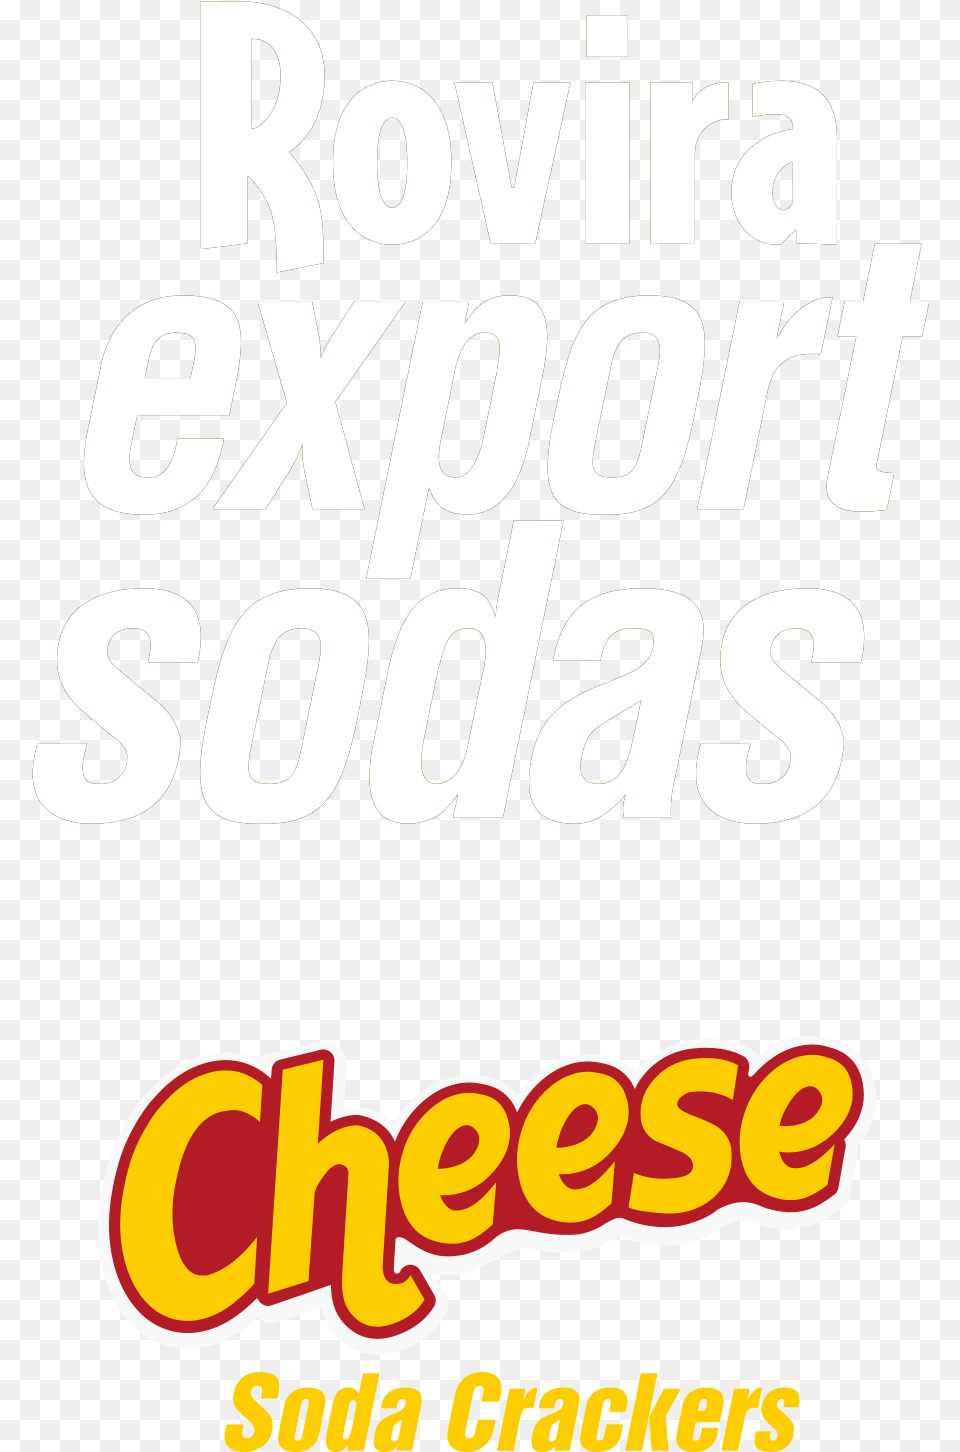 Consumers Love The Taste Of Cheese With Soda Crackers Poster, Advertisement, Text, Dynamite, Weapon Png Image